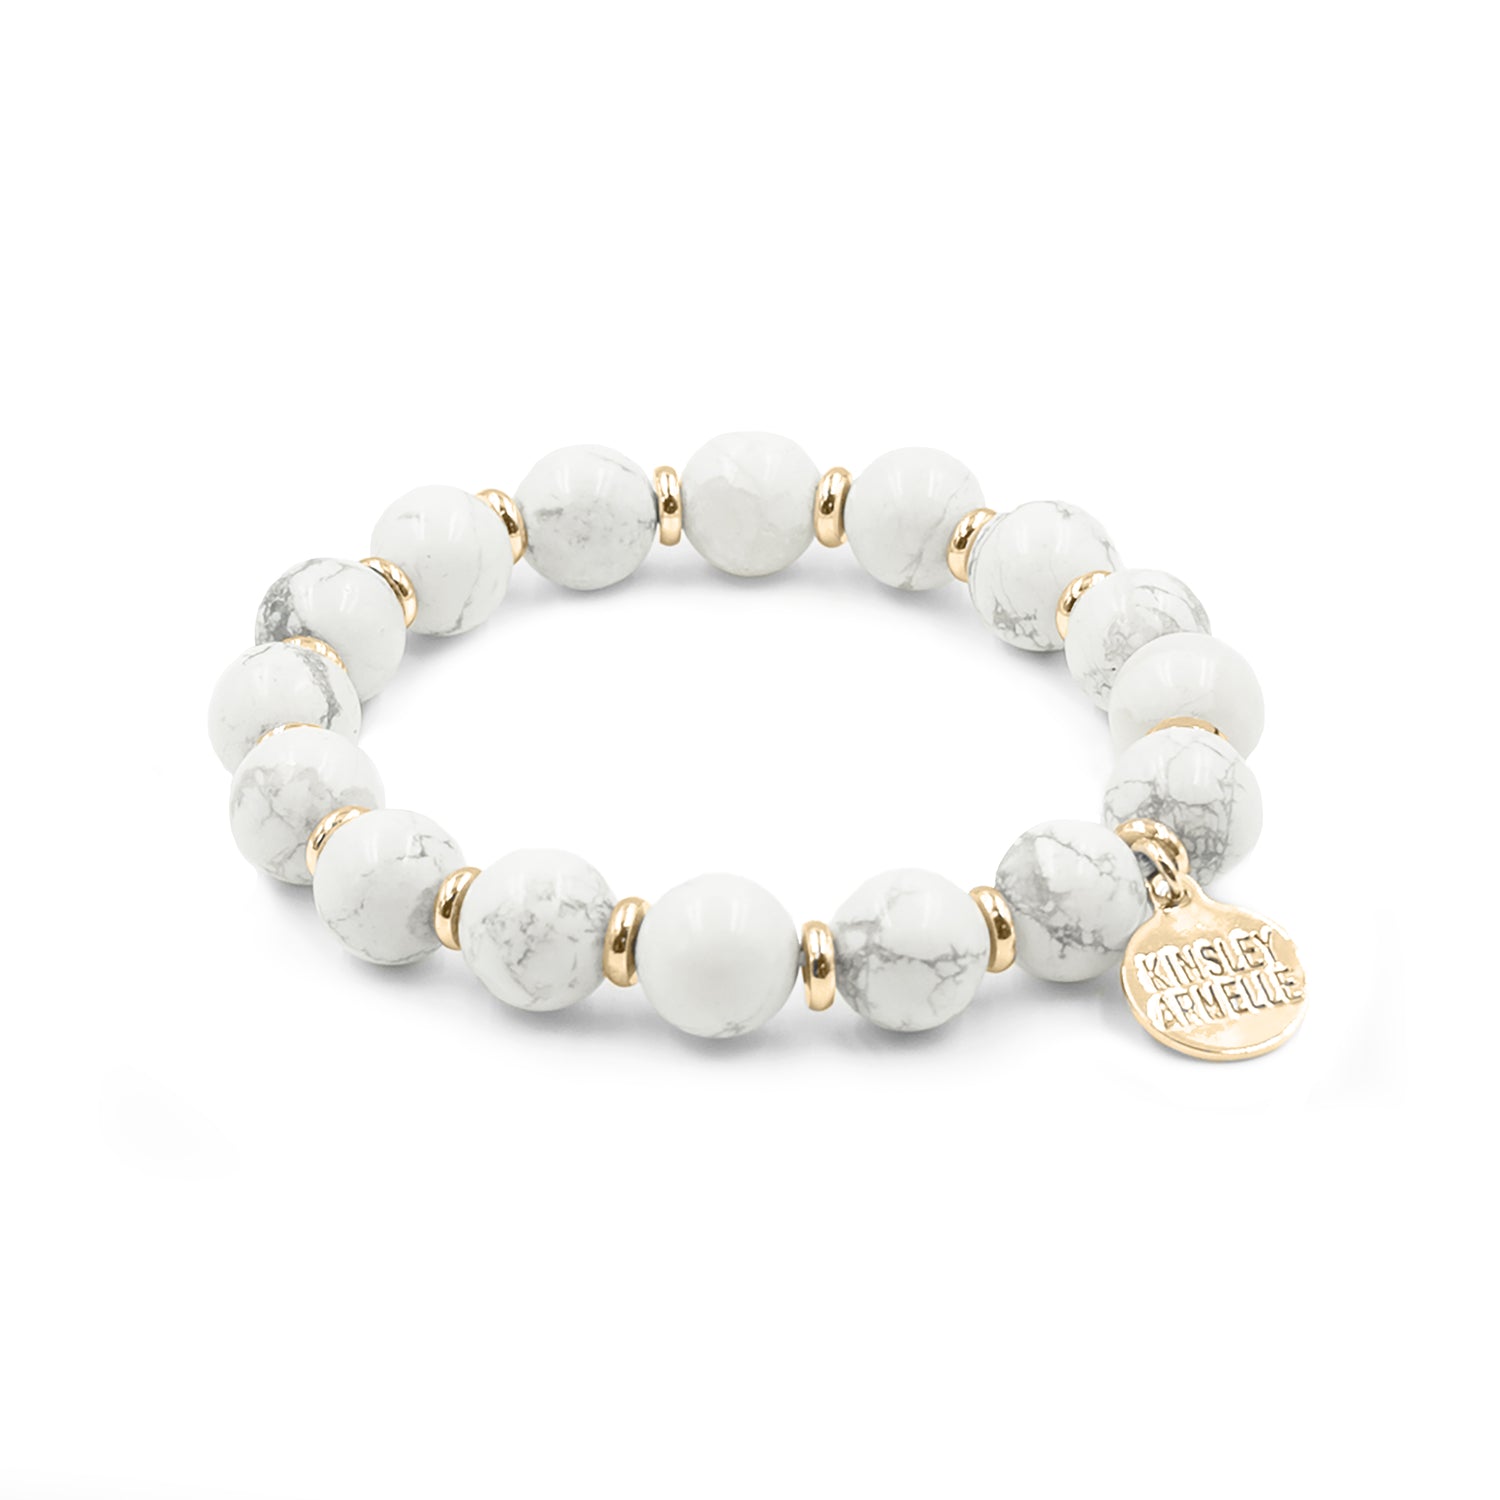 White Marble Howlite Stone Bead Bracelet with Silver Bar and